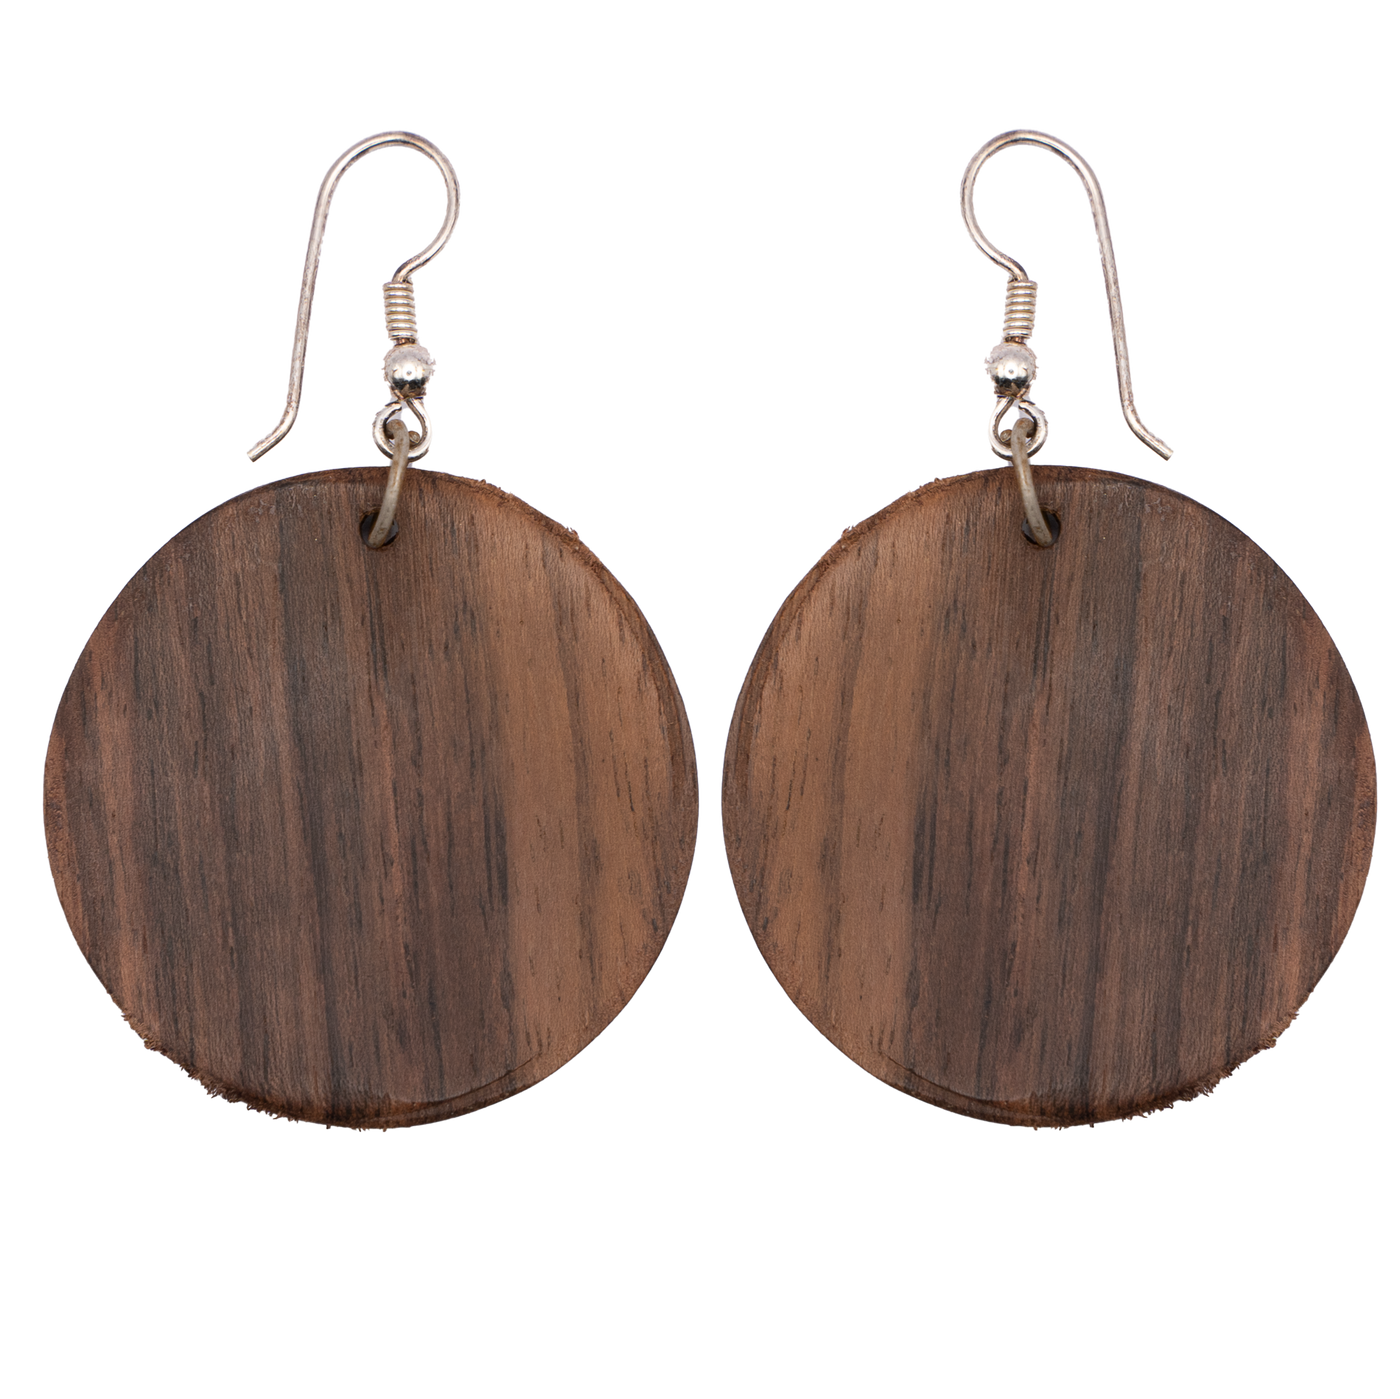 Beautiful round teak wooden earrings with a 925 sterling silver hook to secure in place, approximately 5cm long